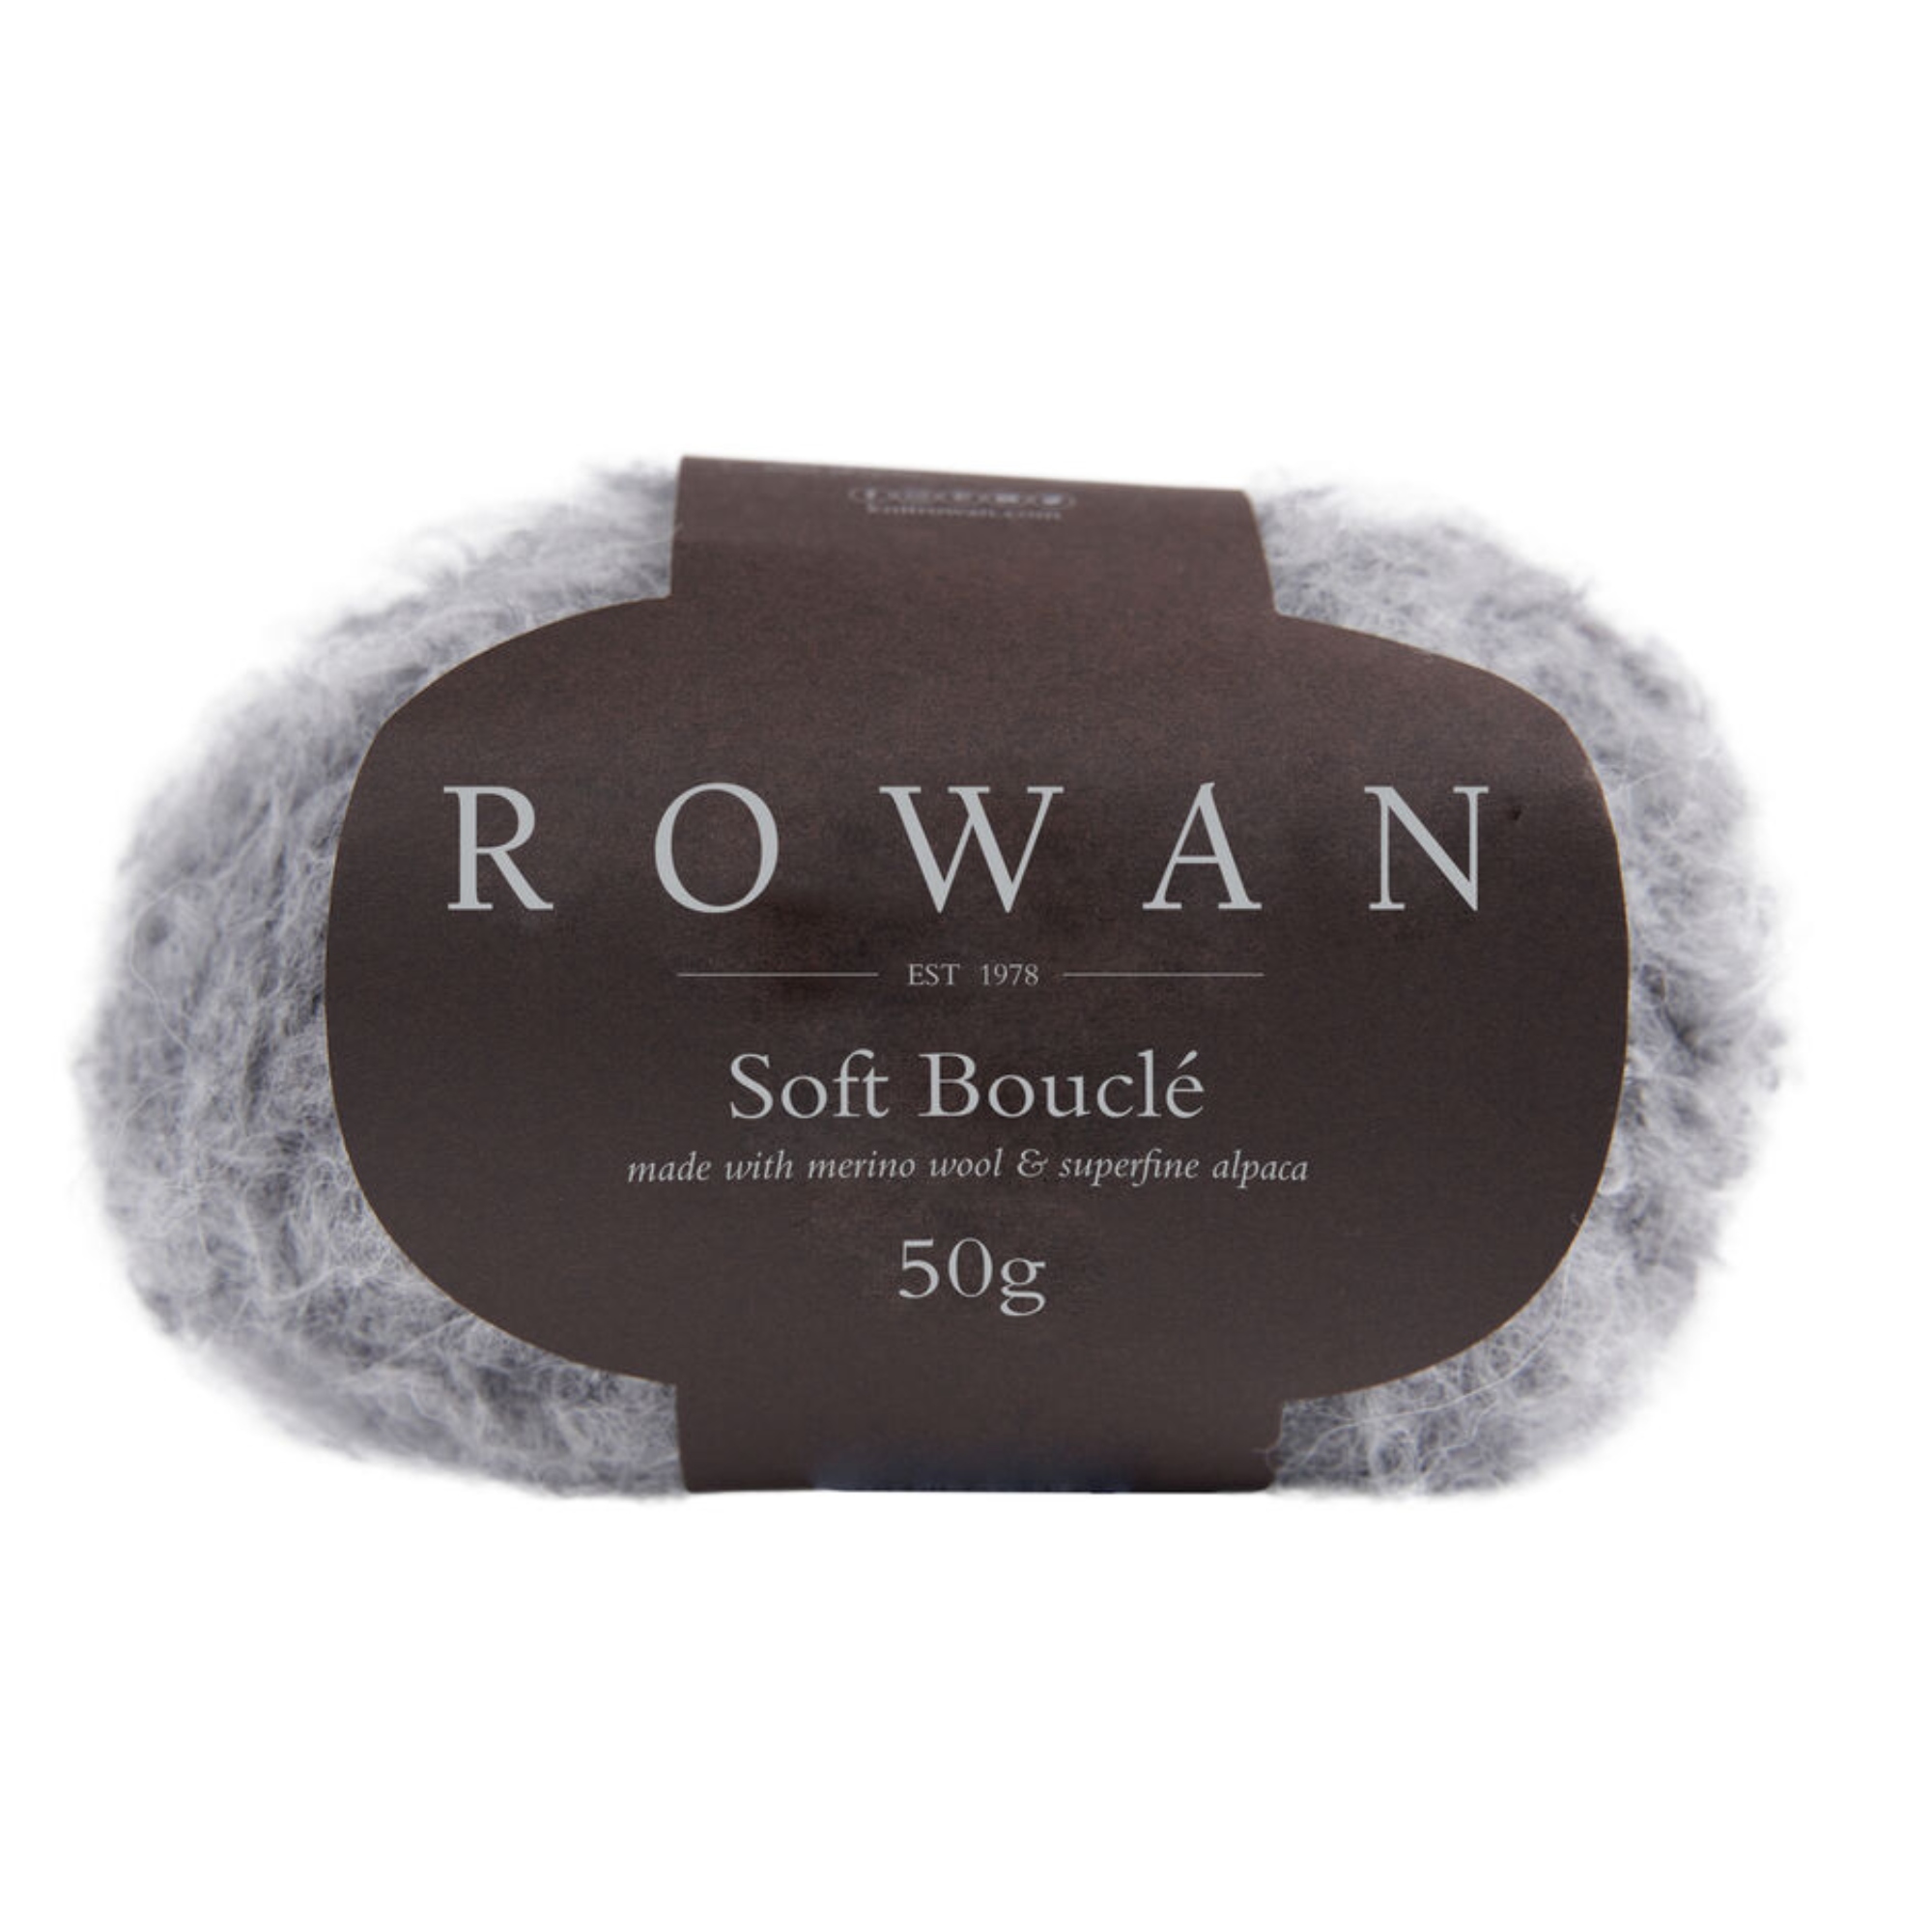 Rowan Soft Boucle 50g - Cotswold Sewing Centres